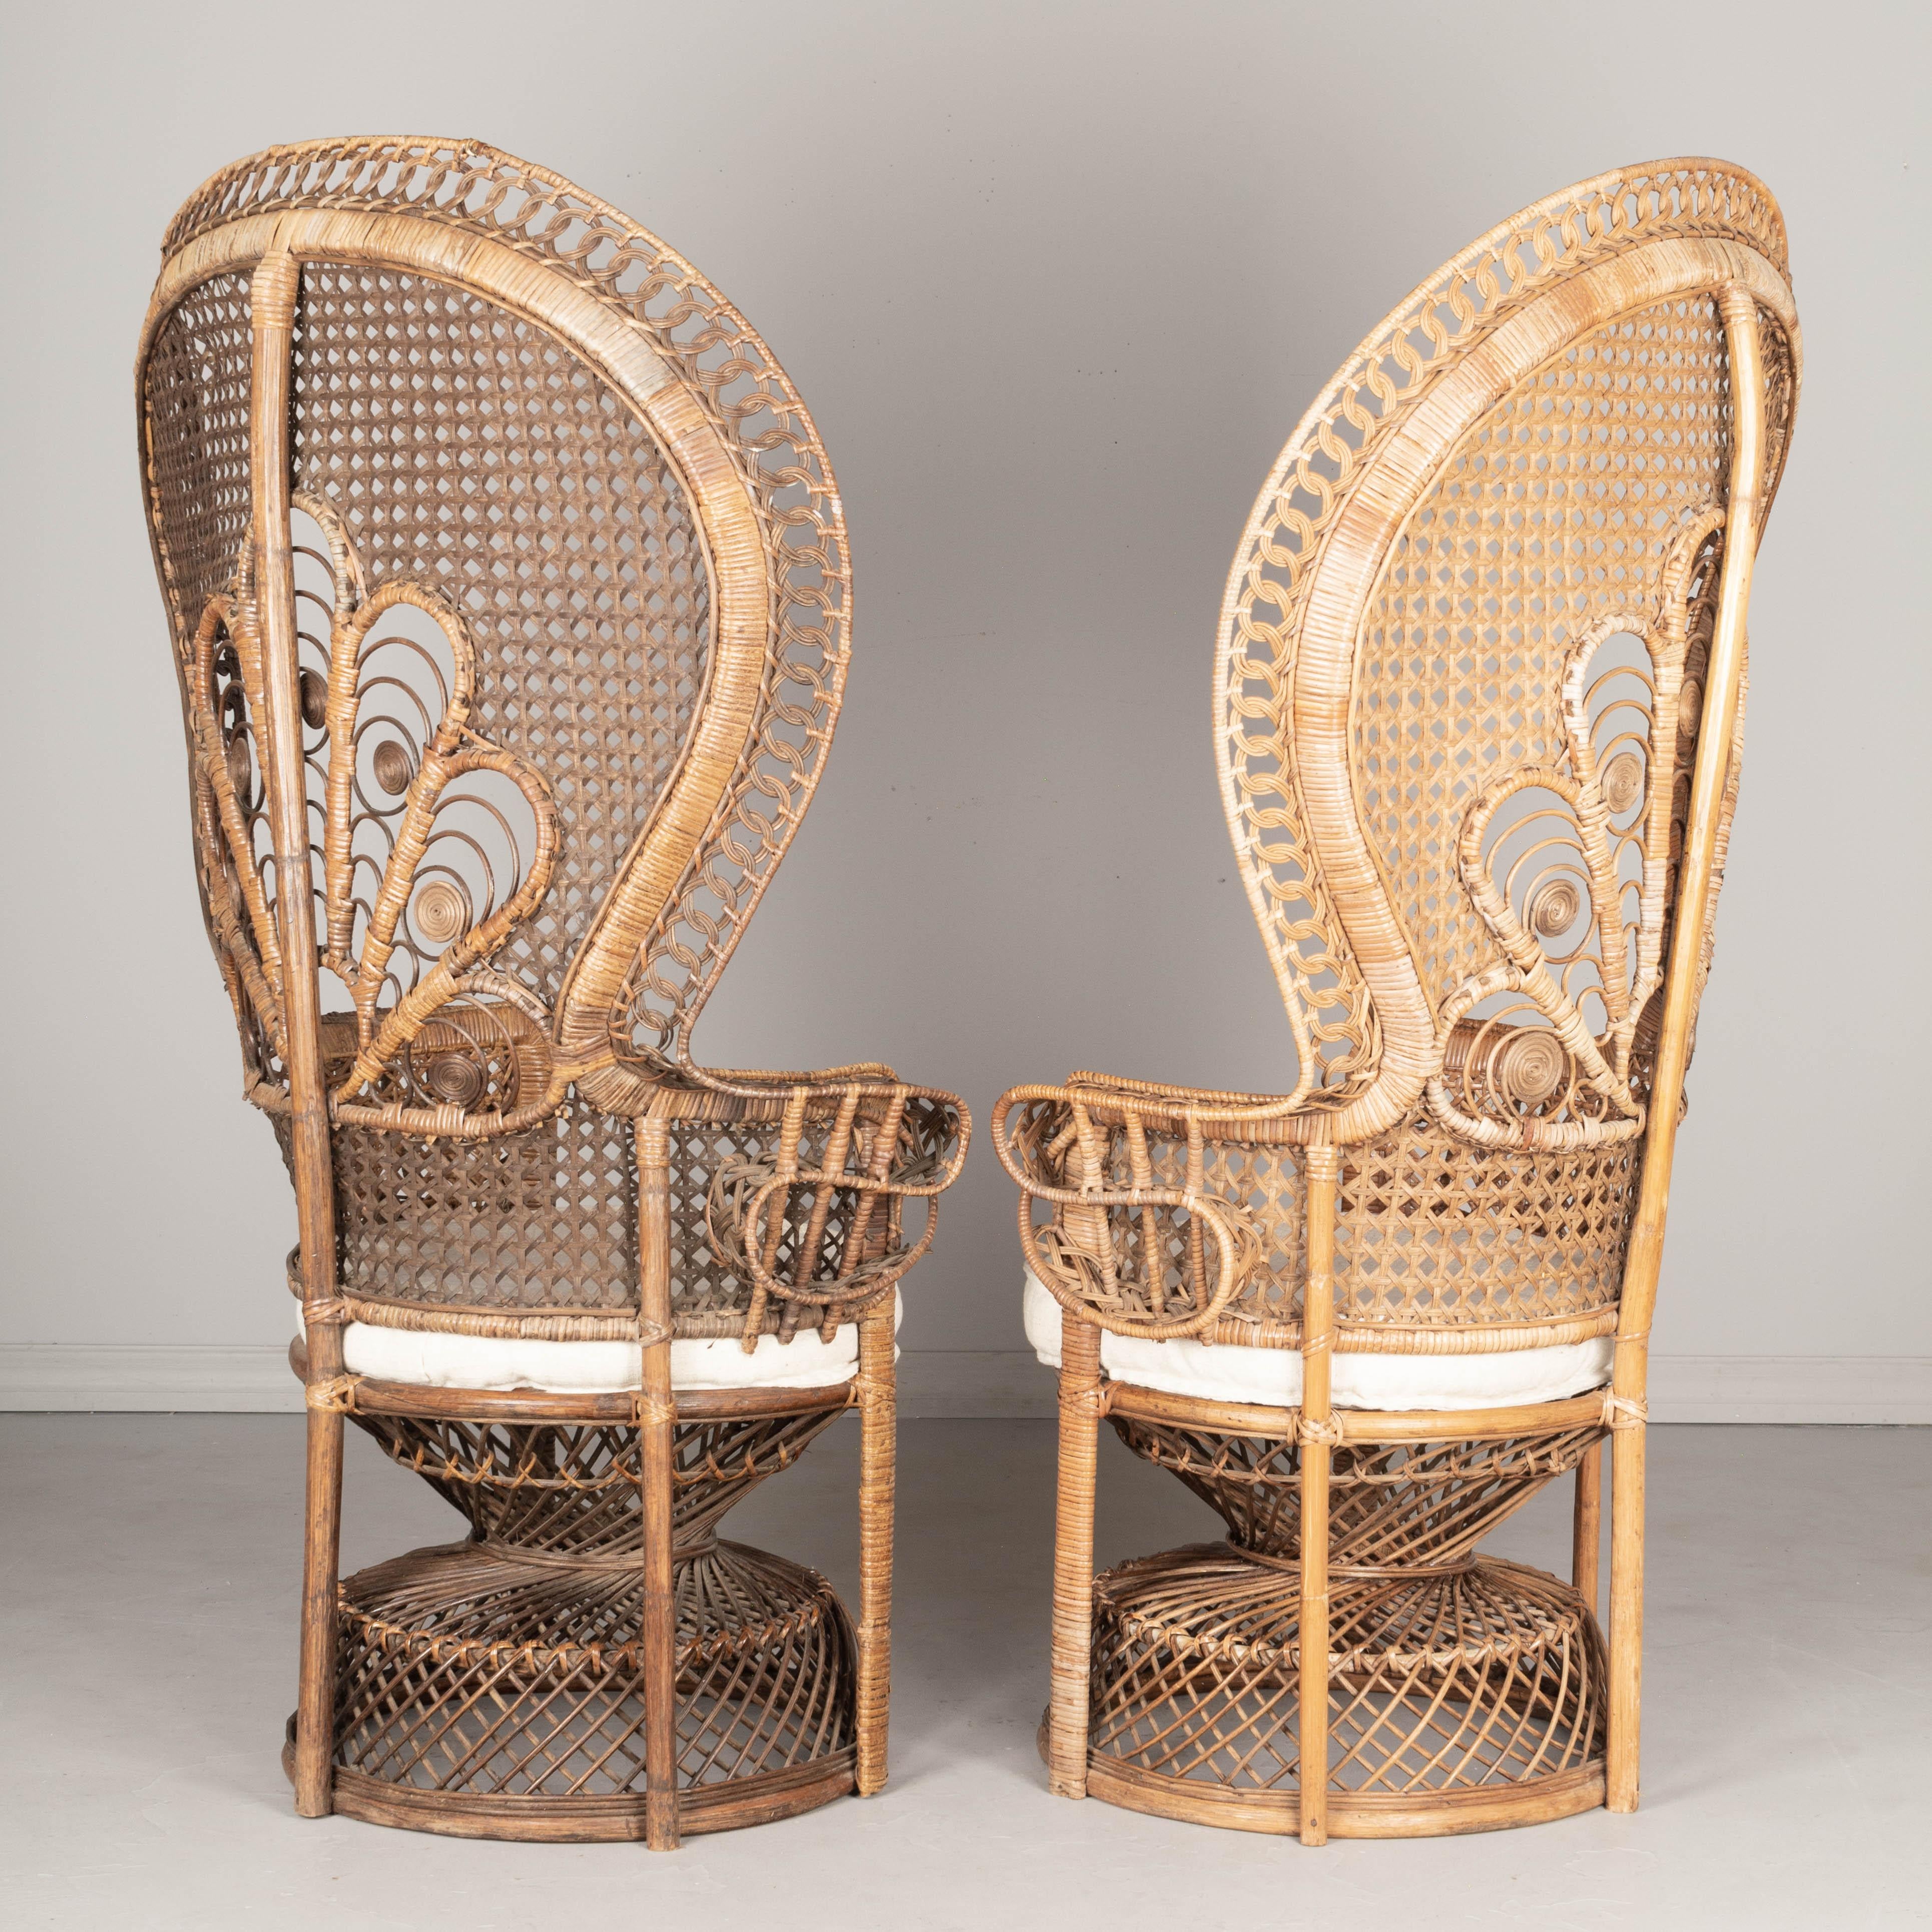 Vintage French Emmanuelle Rattan Peacock Fan Chairs, a Pair 1